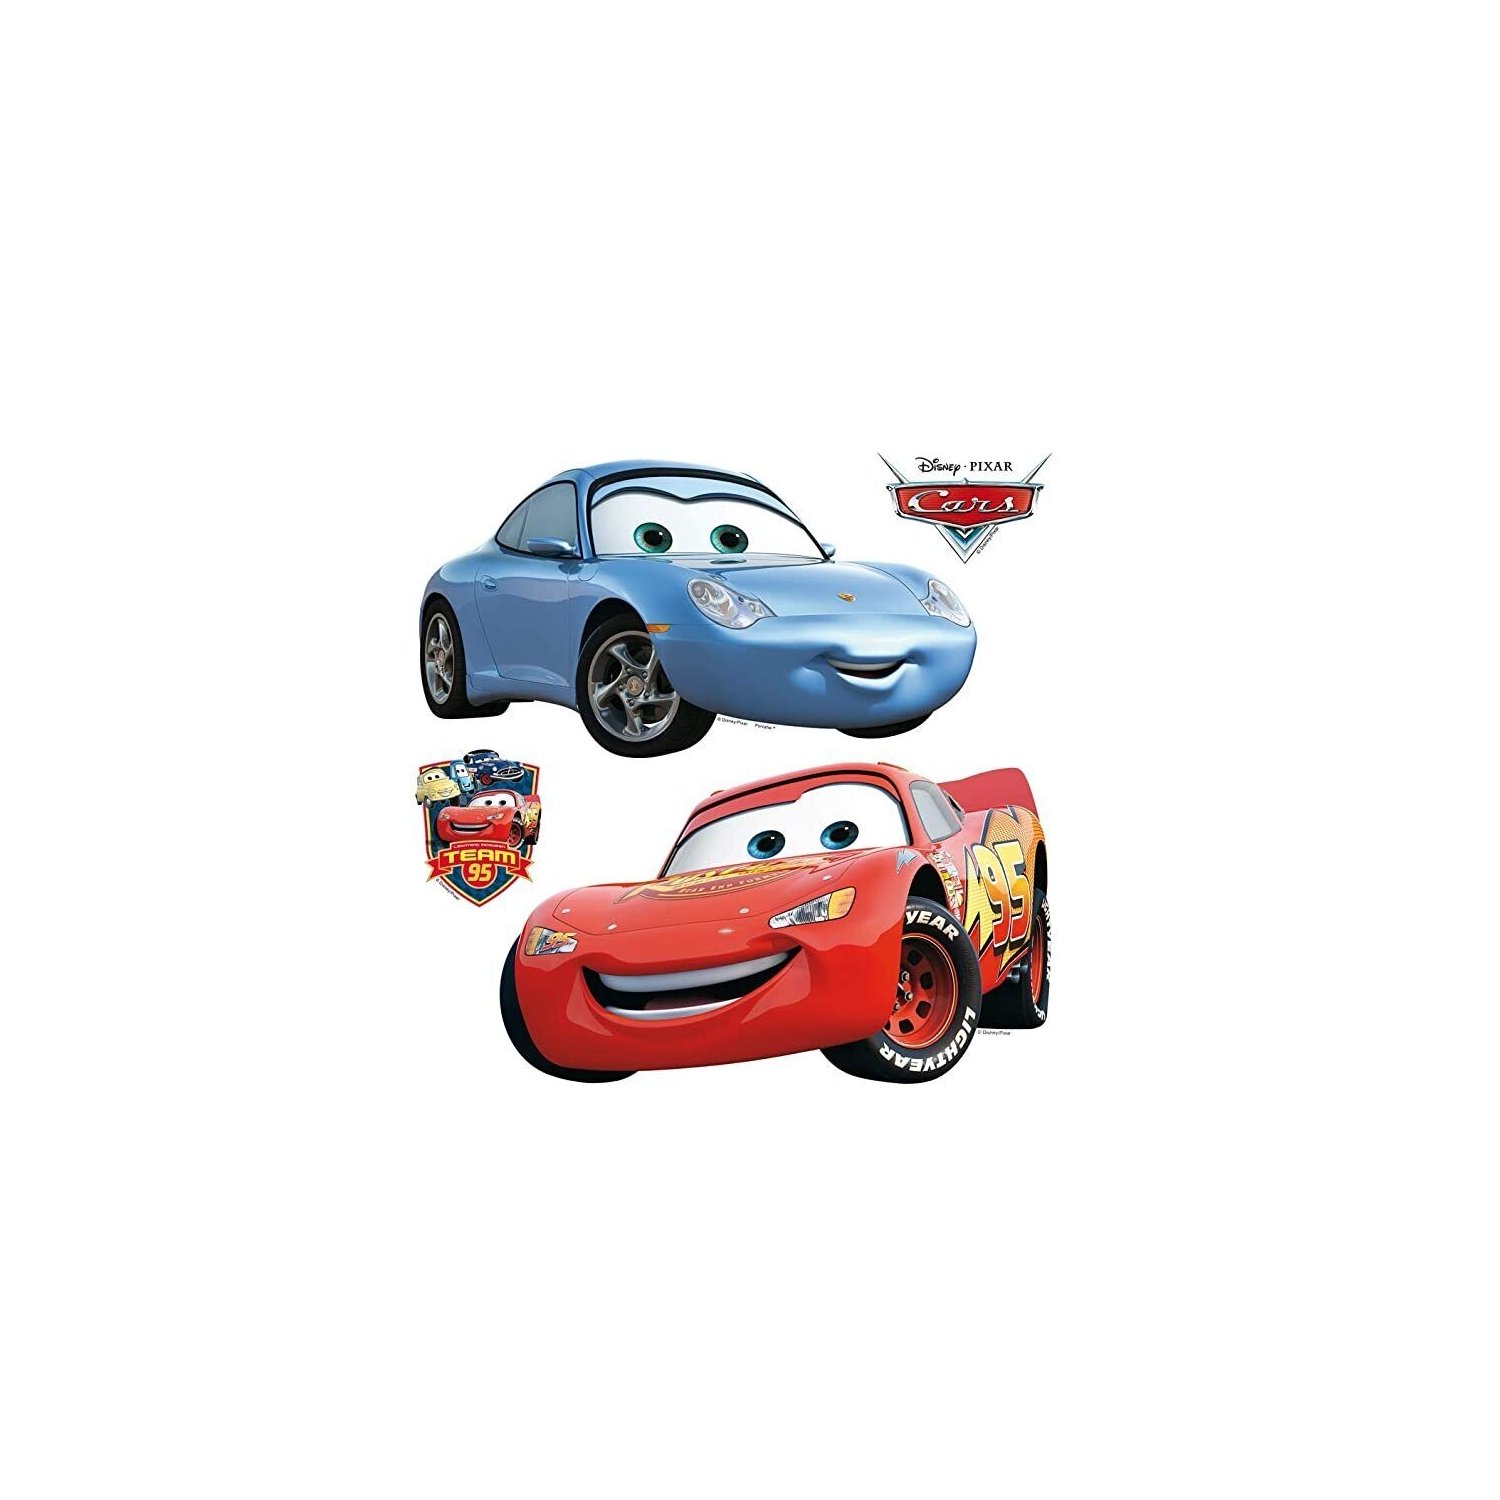 Stickers géant Cars Flash McQueen et Sally